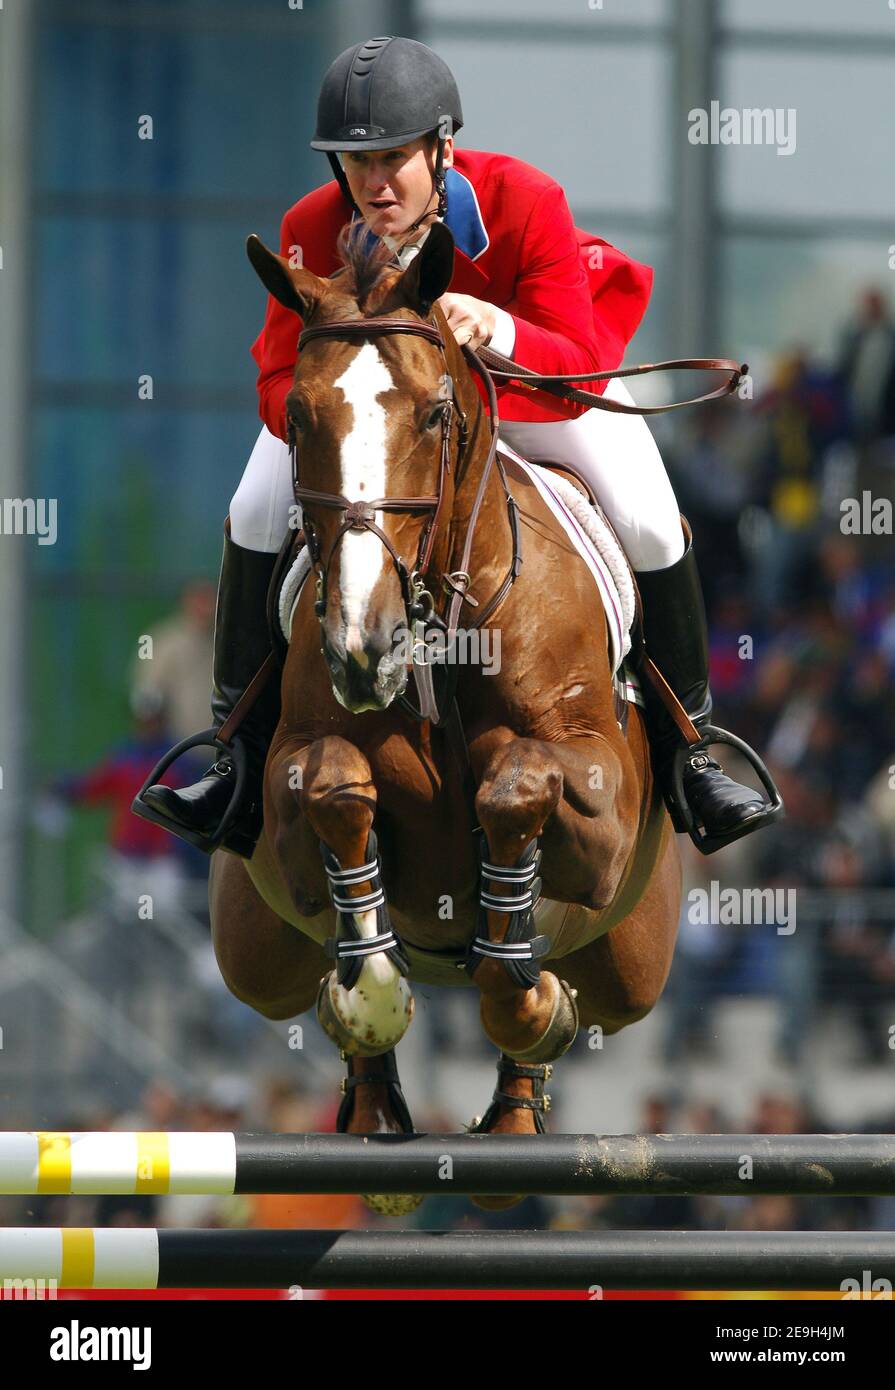 USA's Ward McLain on his horse 'Sapphire' at the first qualyfication for individual and team jumping competition during the 2006 World Equestrian Games in Aachen, Germany, on August 29, 2006. Photo by Edwin Cook/Cameleon/ABACAPRESS.COM Stock Photo